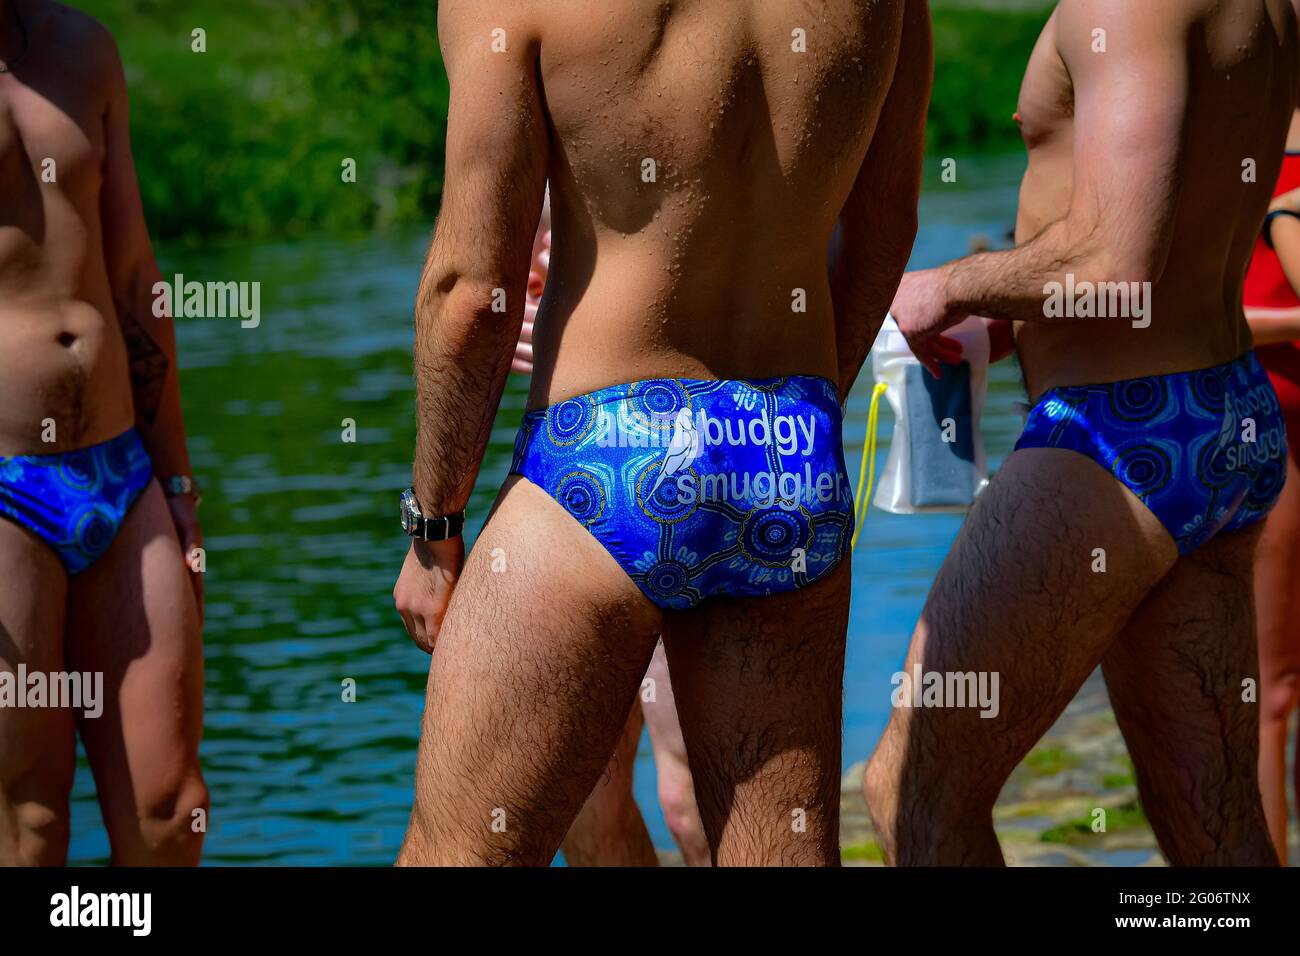 https://c8.alamy.com/comp/2G06TNX/male-swimmers-wear-budgy-smugglers-in-the-hot-weather-at-warleigh-weir-bath-on-the-first-day-of-meteorological-summer-picture-date-tuesday-june-1-2021-2G06TNX.jpg